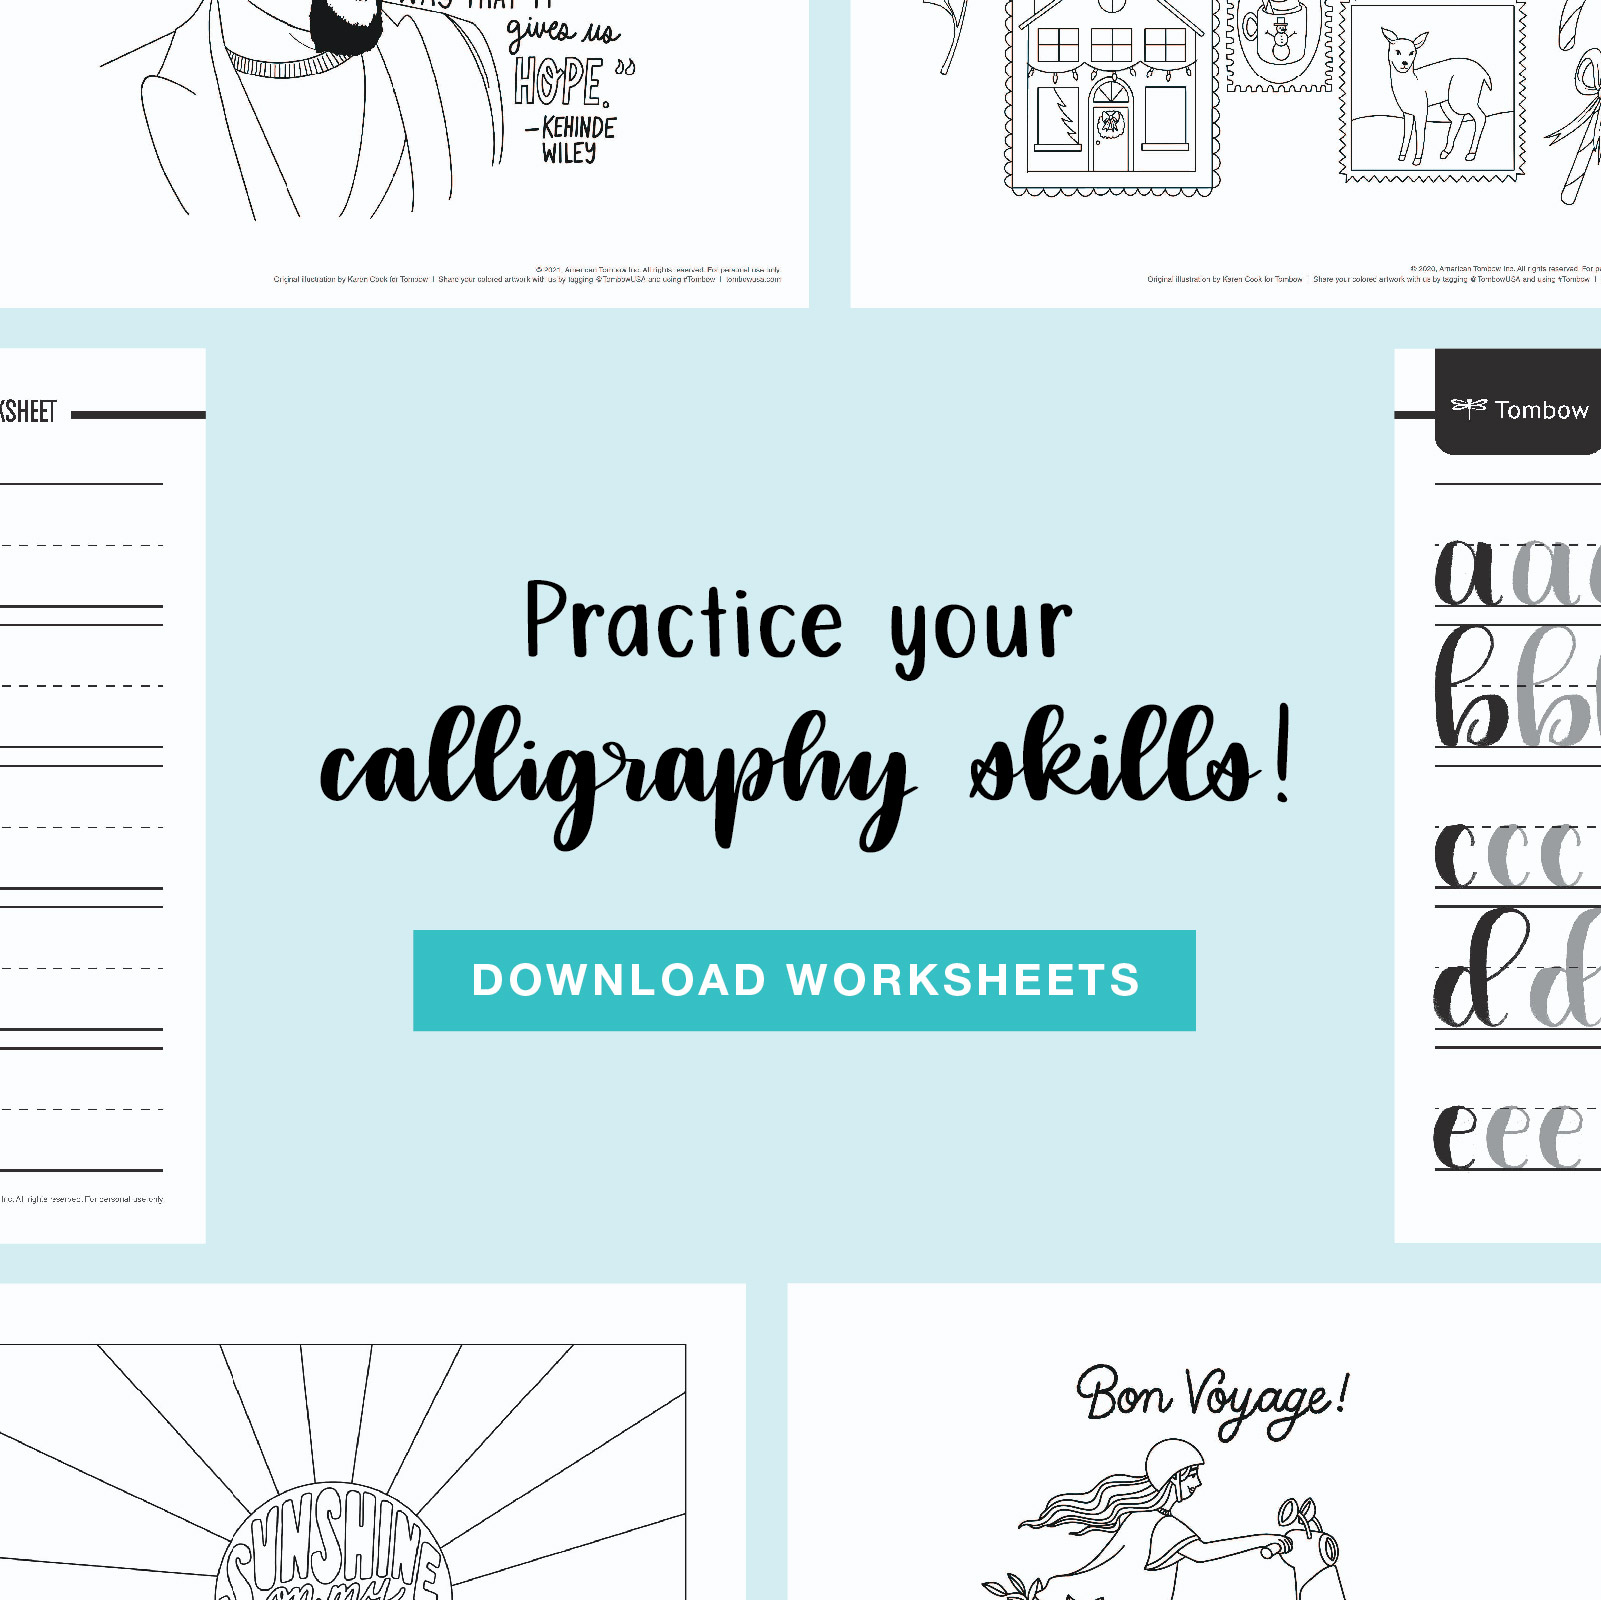 Practice your calligraphy skills! Click here to download worksheets.